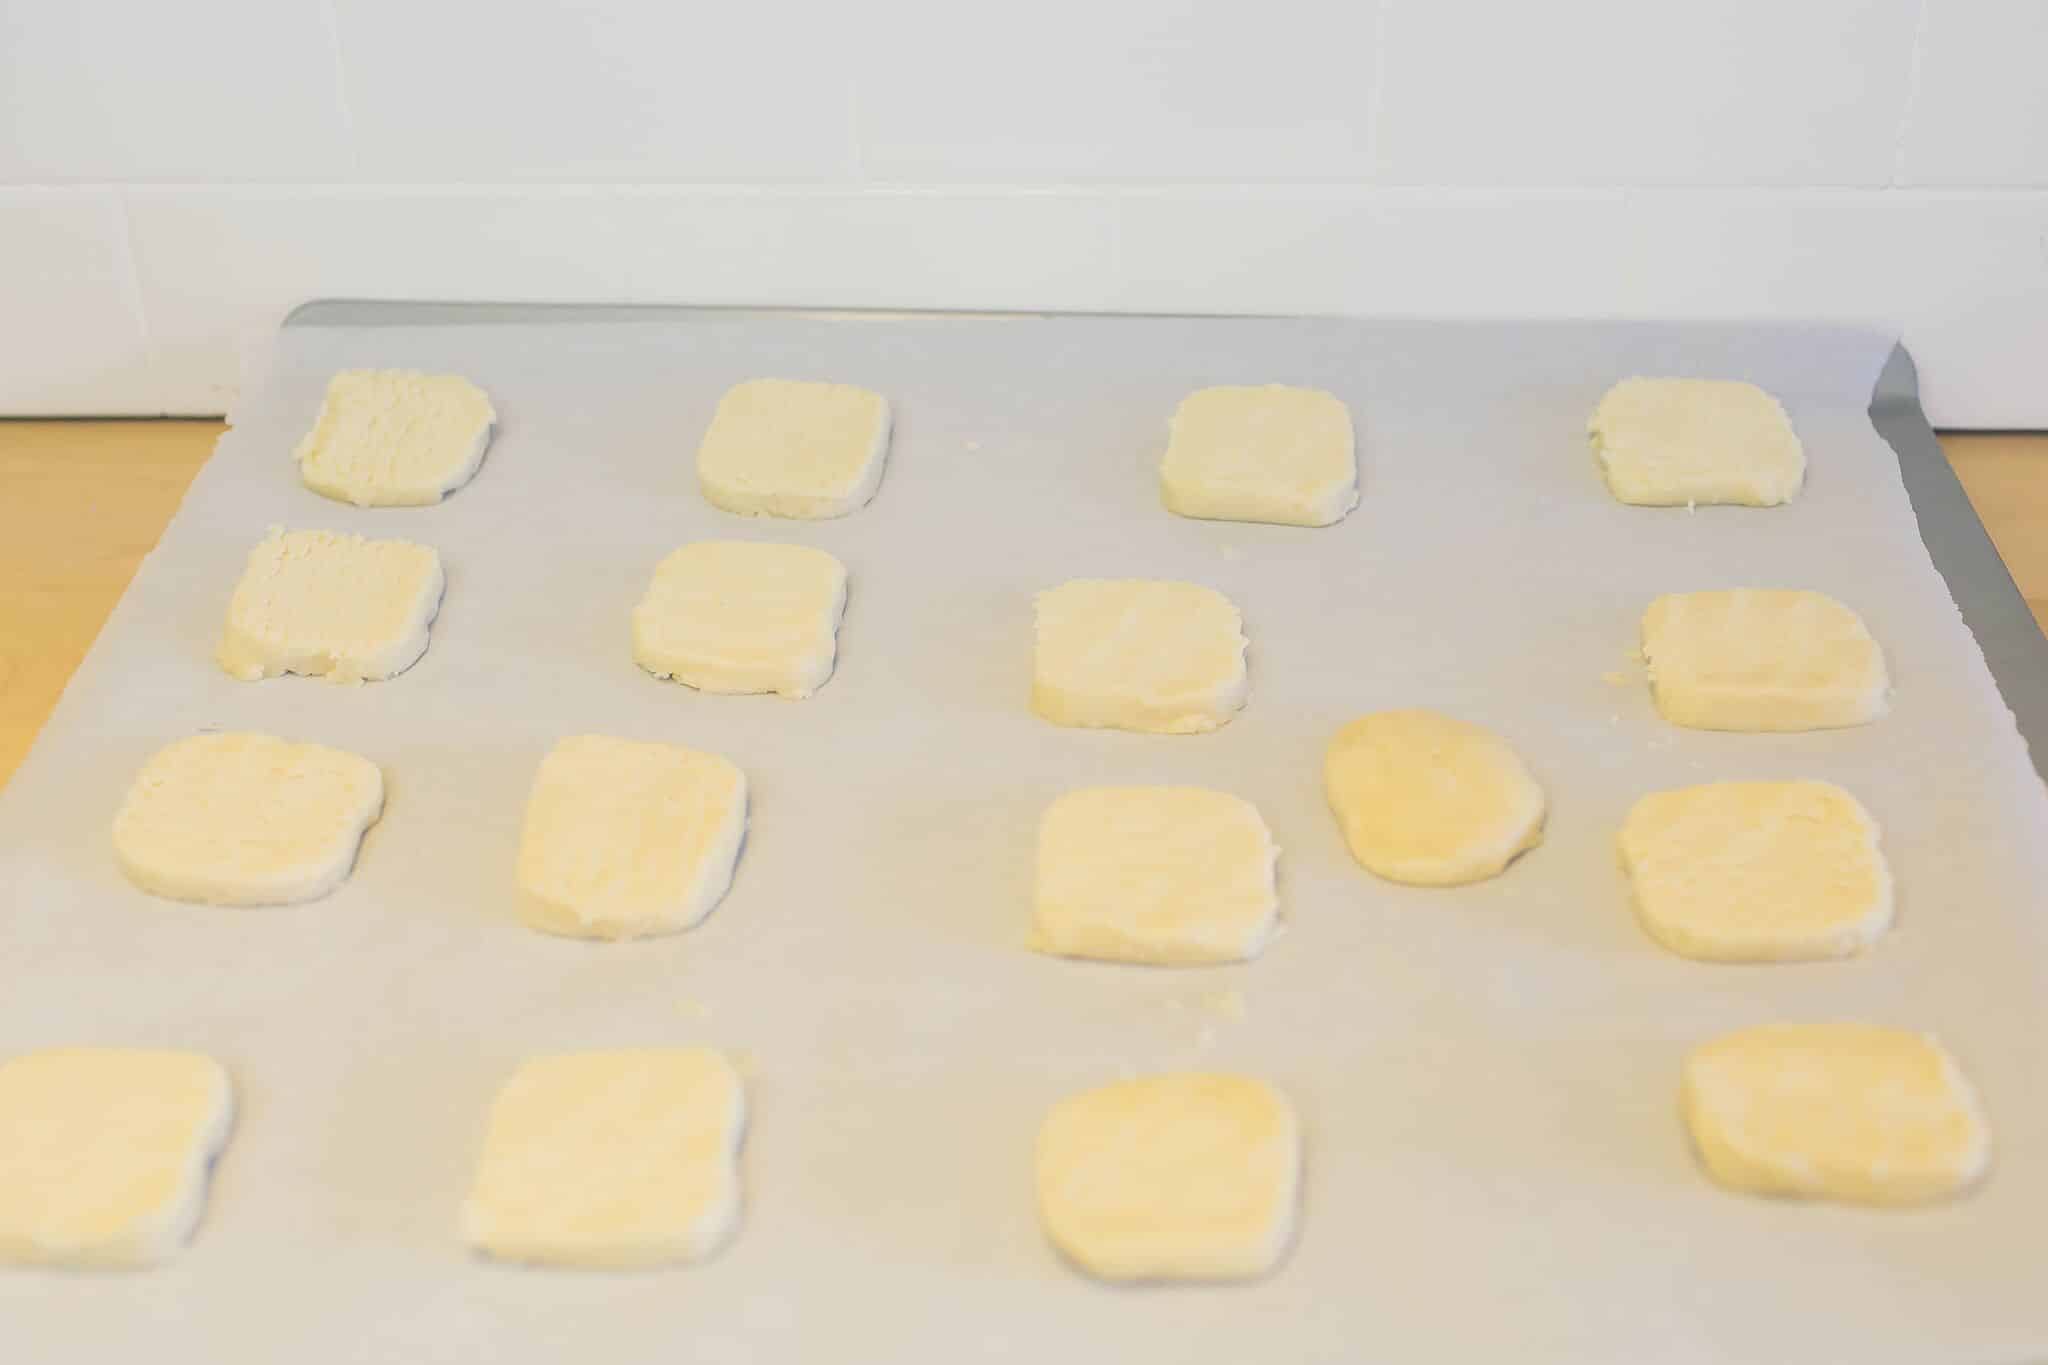 Cut cookie dough into 1/2 slices and place on baking sheet lined with parchment paper.